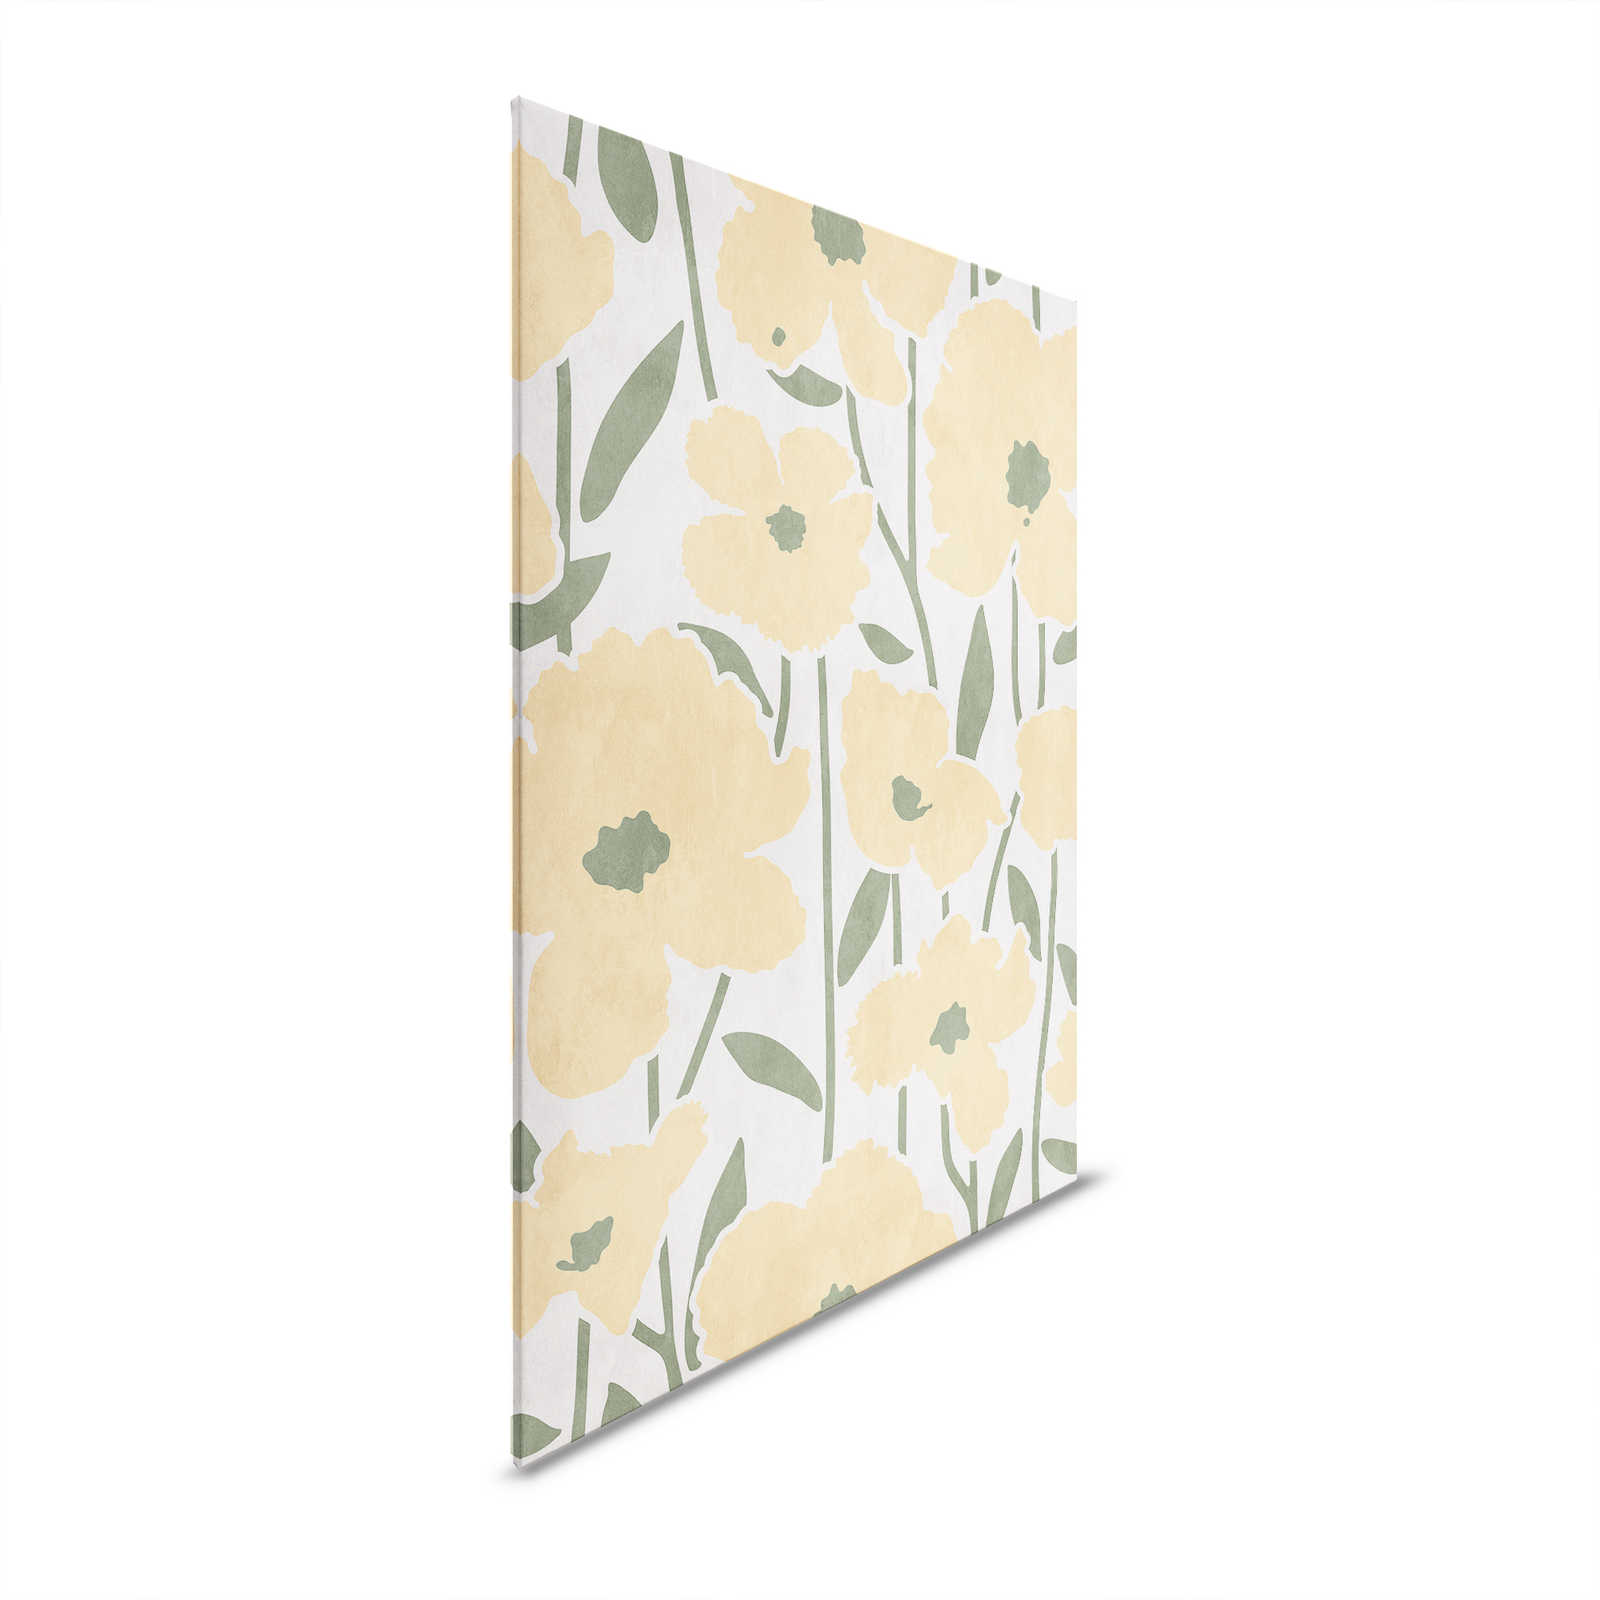 Flower Market 3 - Flowers Canvas painting Yellow Flowers Pattern & Rendering - 0.80 m x 1.20 m
